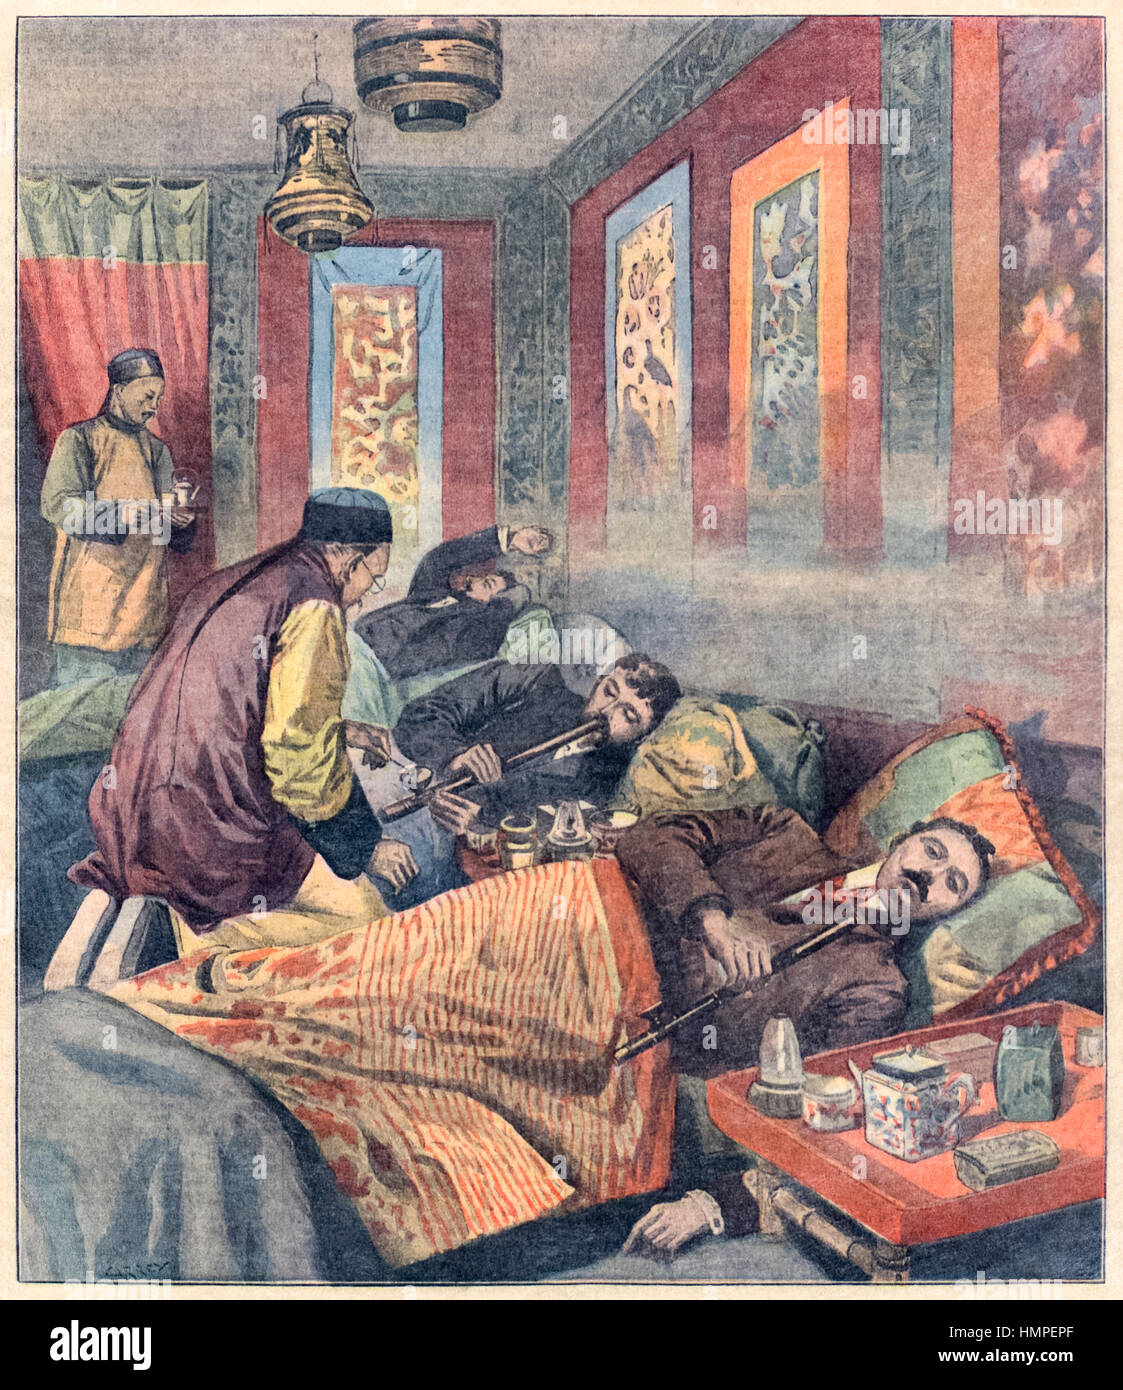 ‘Opium smoking in France’ front cover illustration of an opium den in France from ‘Le Petit Parisien‘ 1907 discussing the rise of opium smoking in France and the opening of dens in port cities. Of particular concern was the growing number of military personnel returning from French Indochina addicted to opium fueling demand in mainland France. In October 1908 strict controls on the sale and use of opium were introduced. See description for more information. Stock Photo